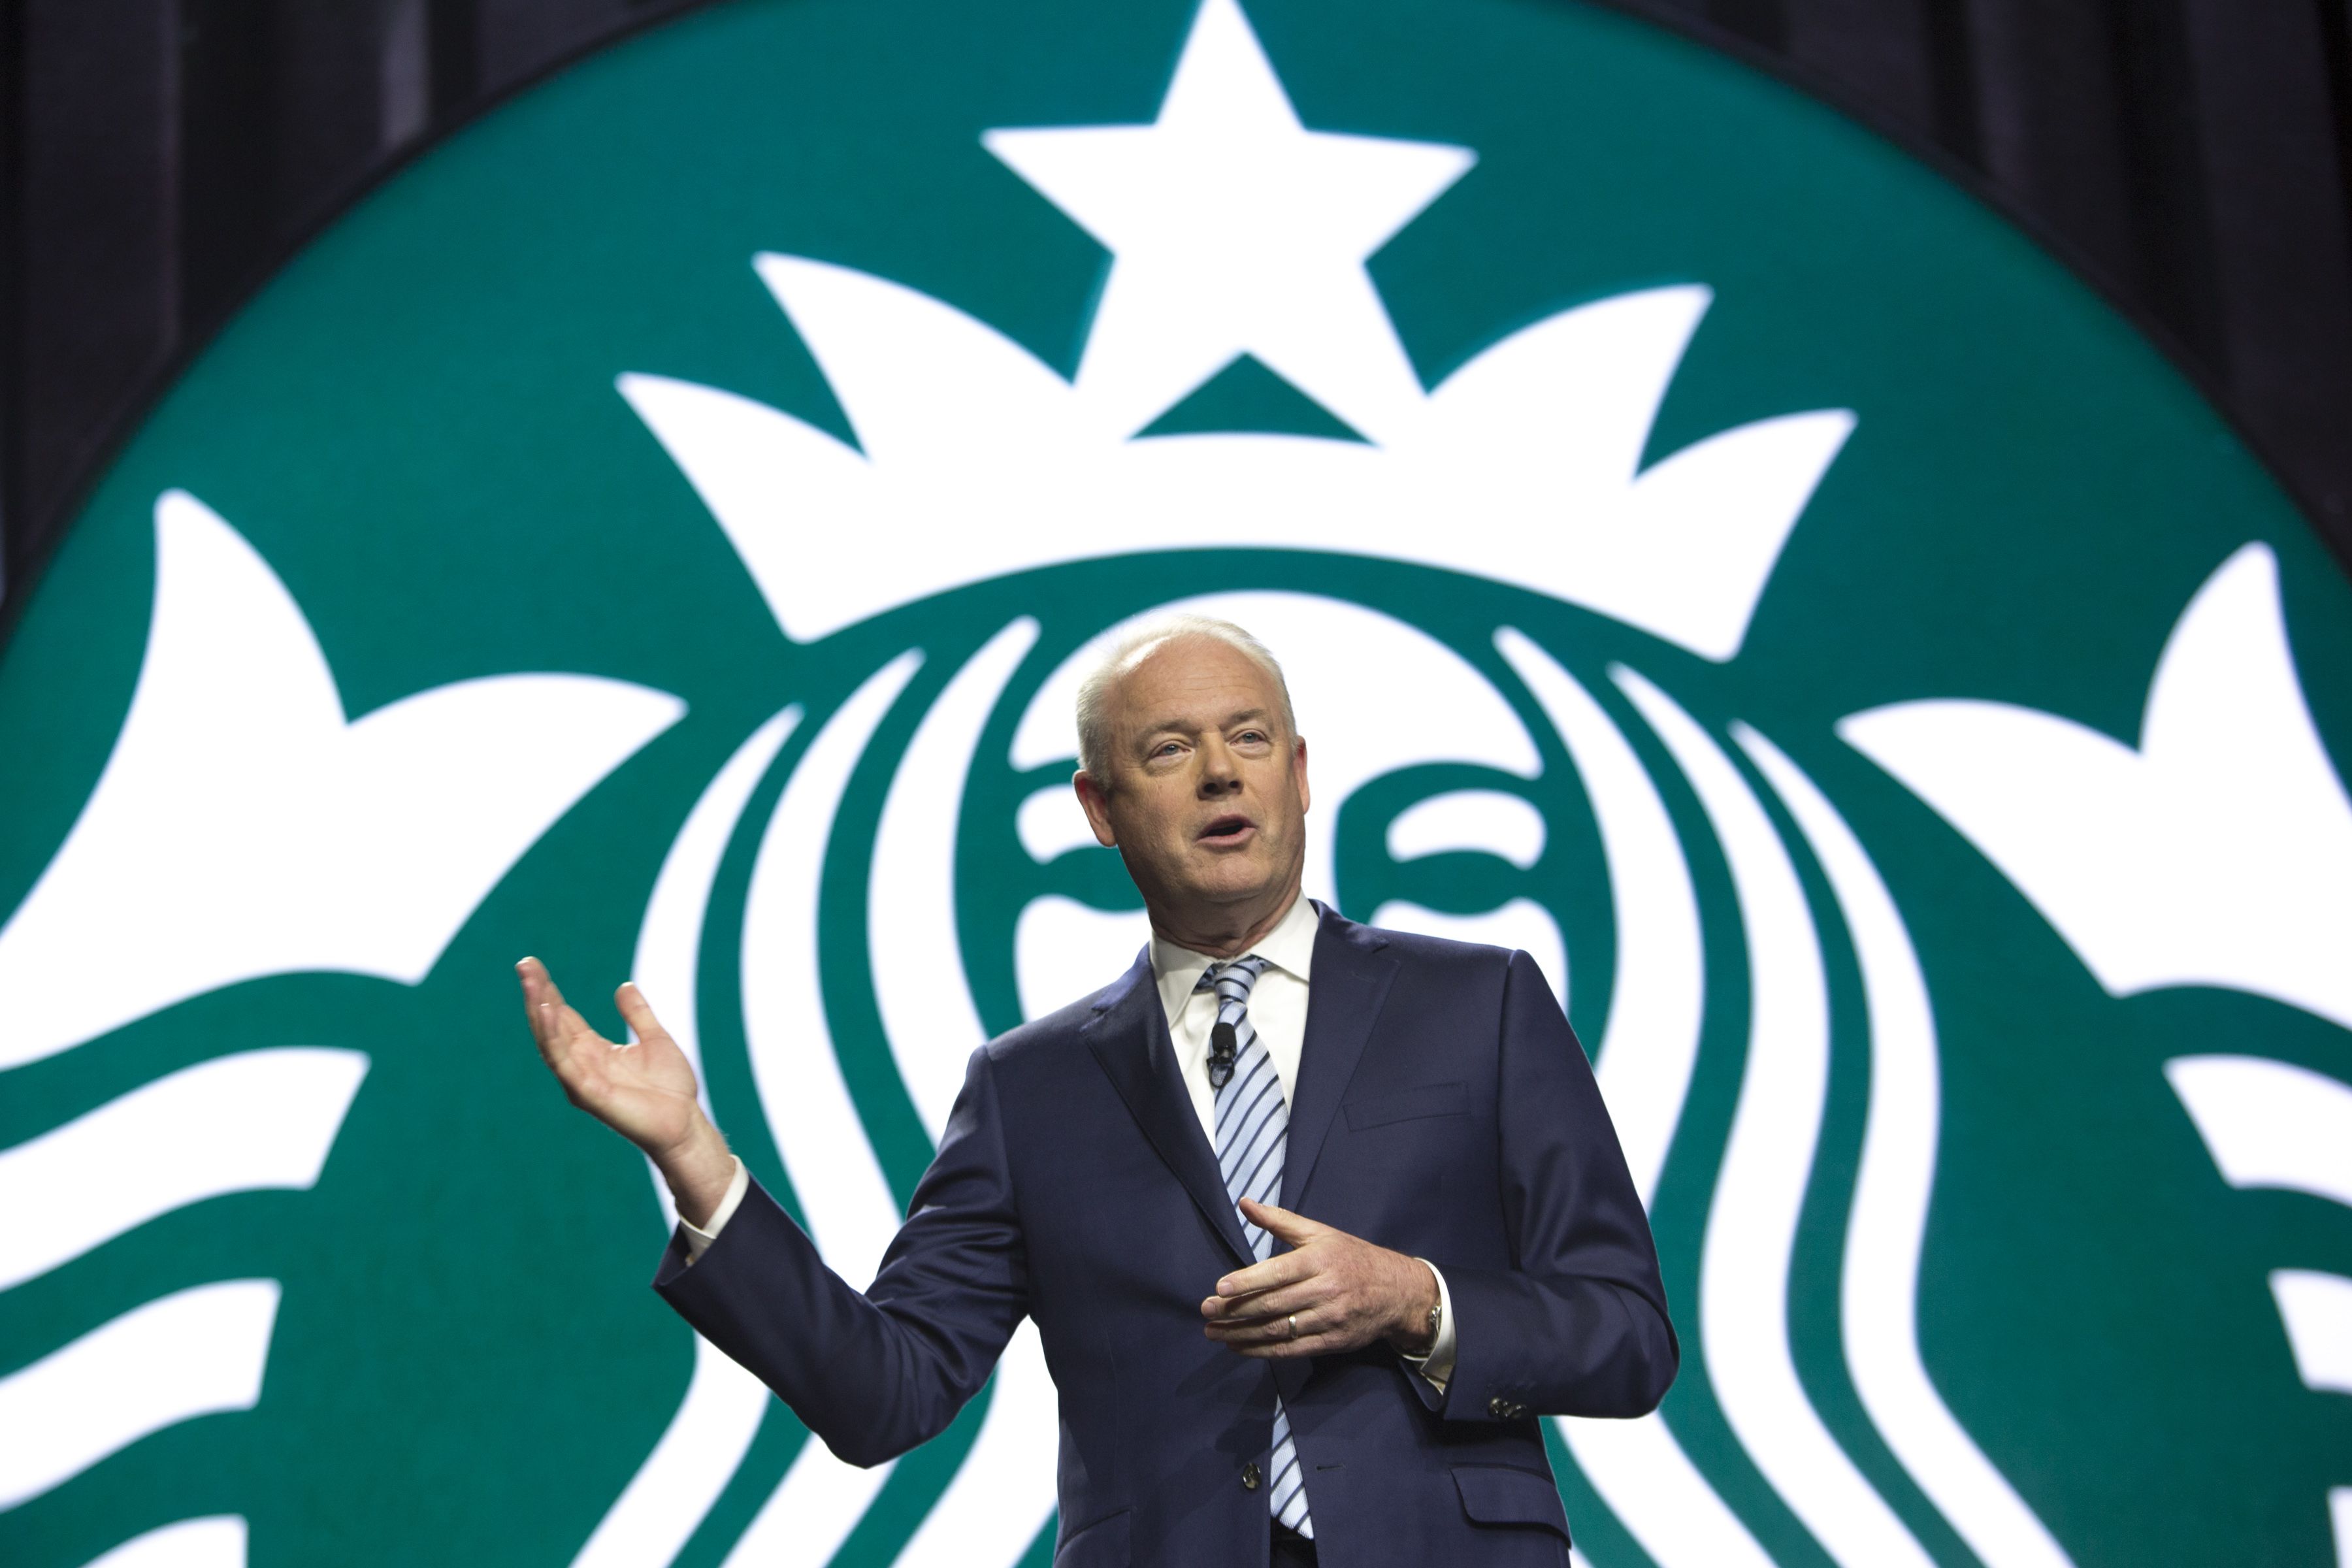 Starbucks CEO calls Chinese rivals' use of discounts unsustainable